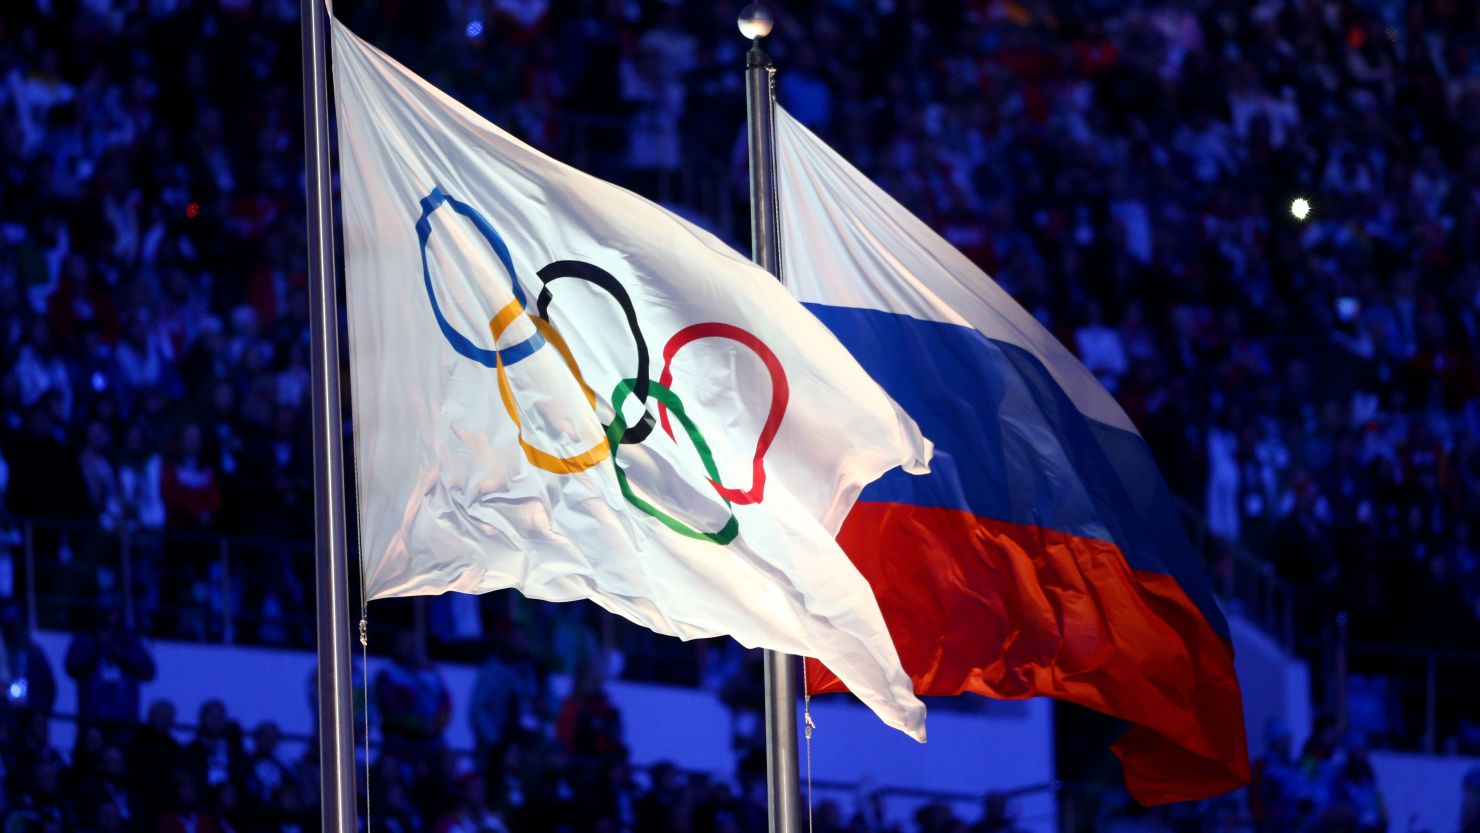 The lawyer for doping whistleblower Grigory Rodchenkov has strongly condemned the decision to lift the Russian Olympic Committee's suspension. 